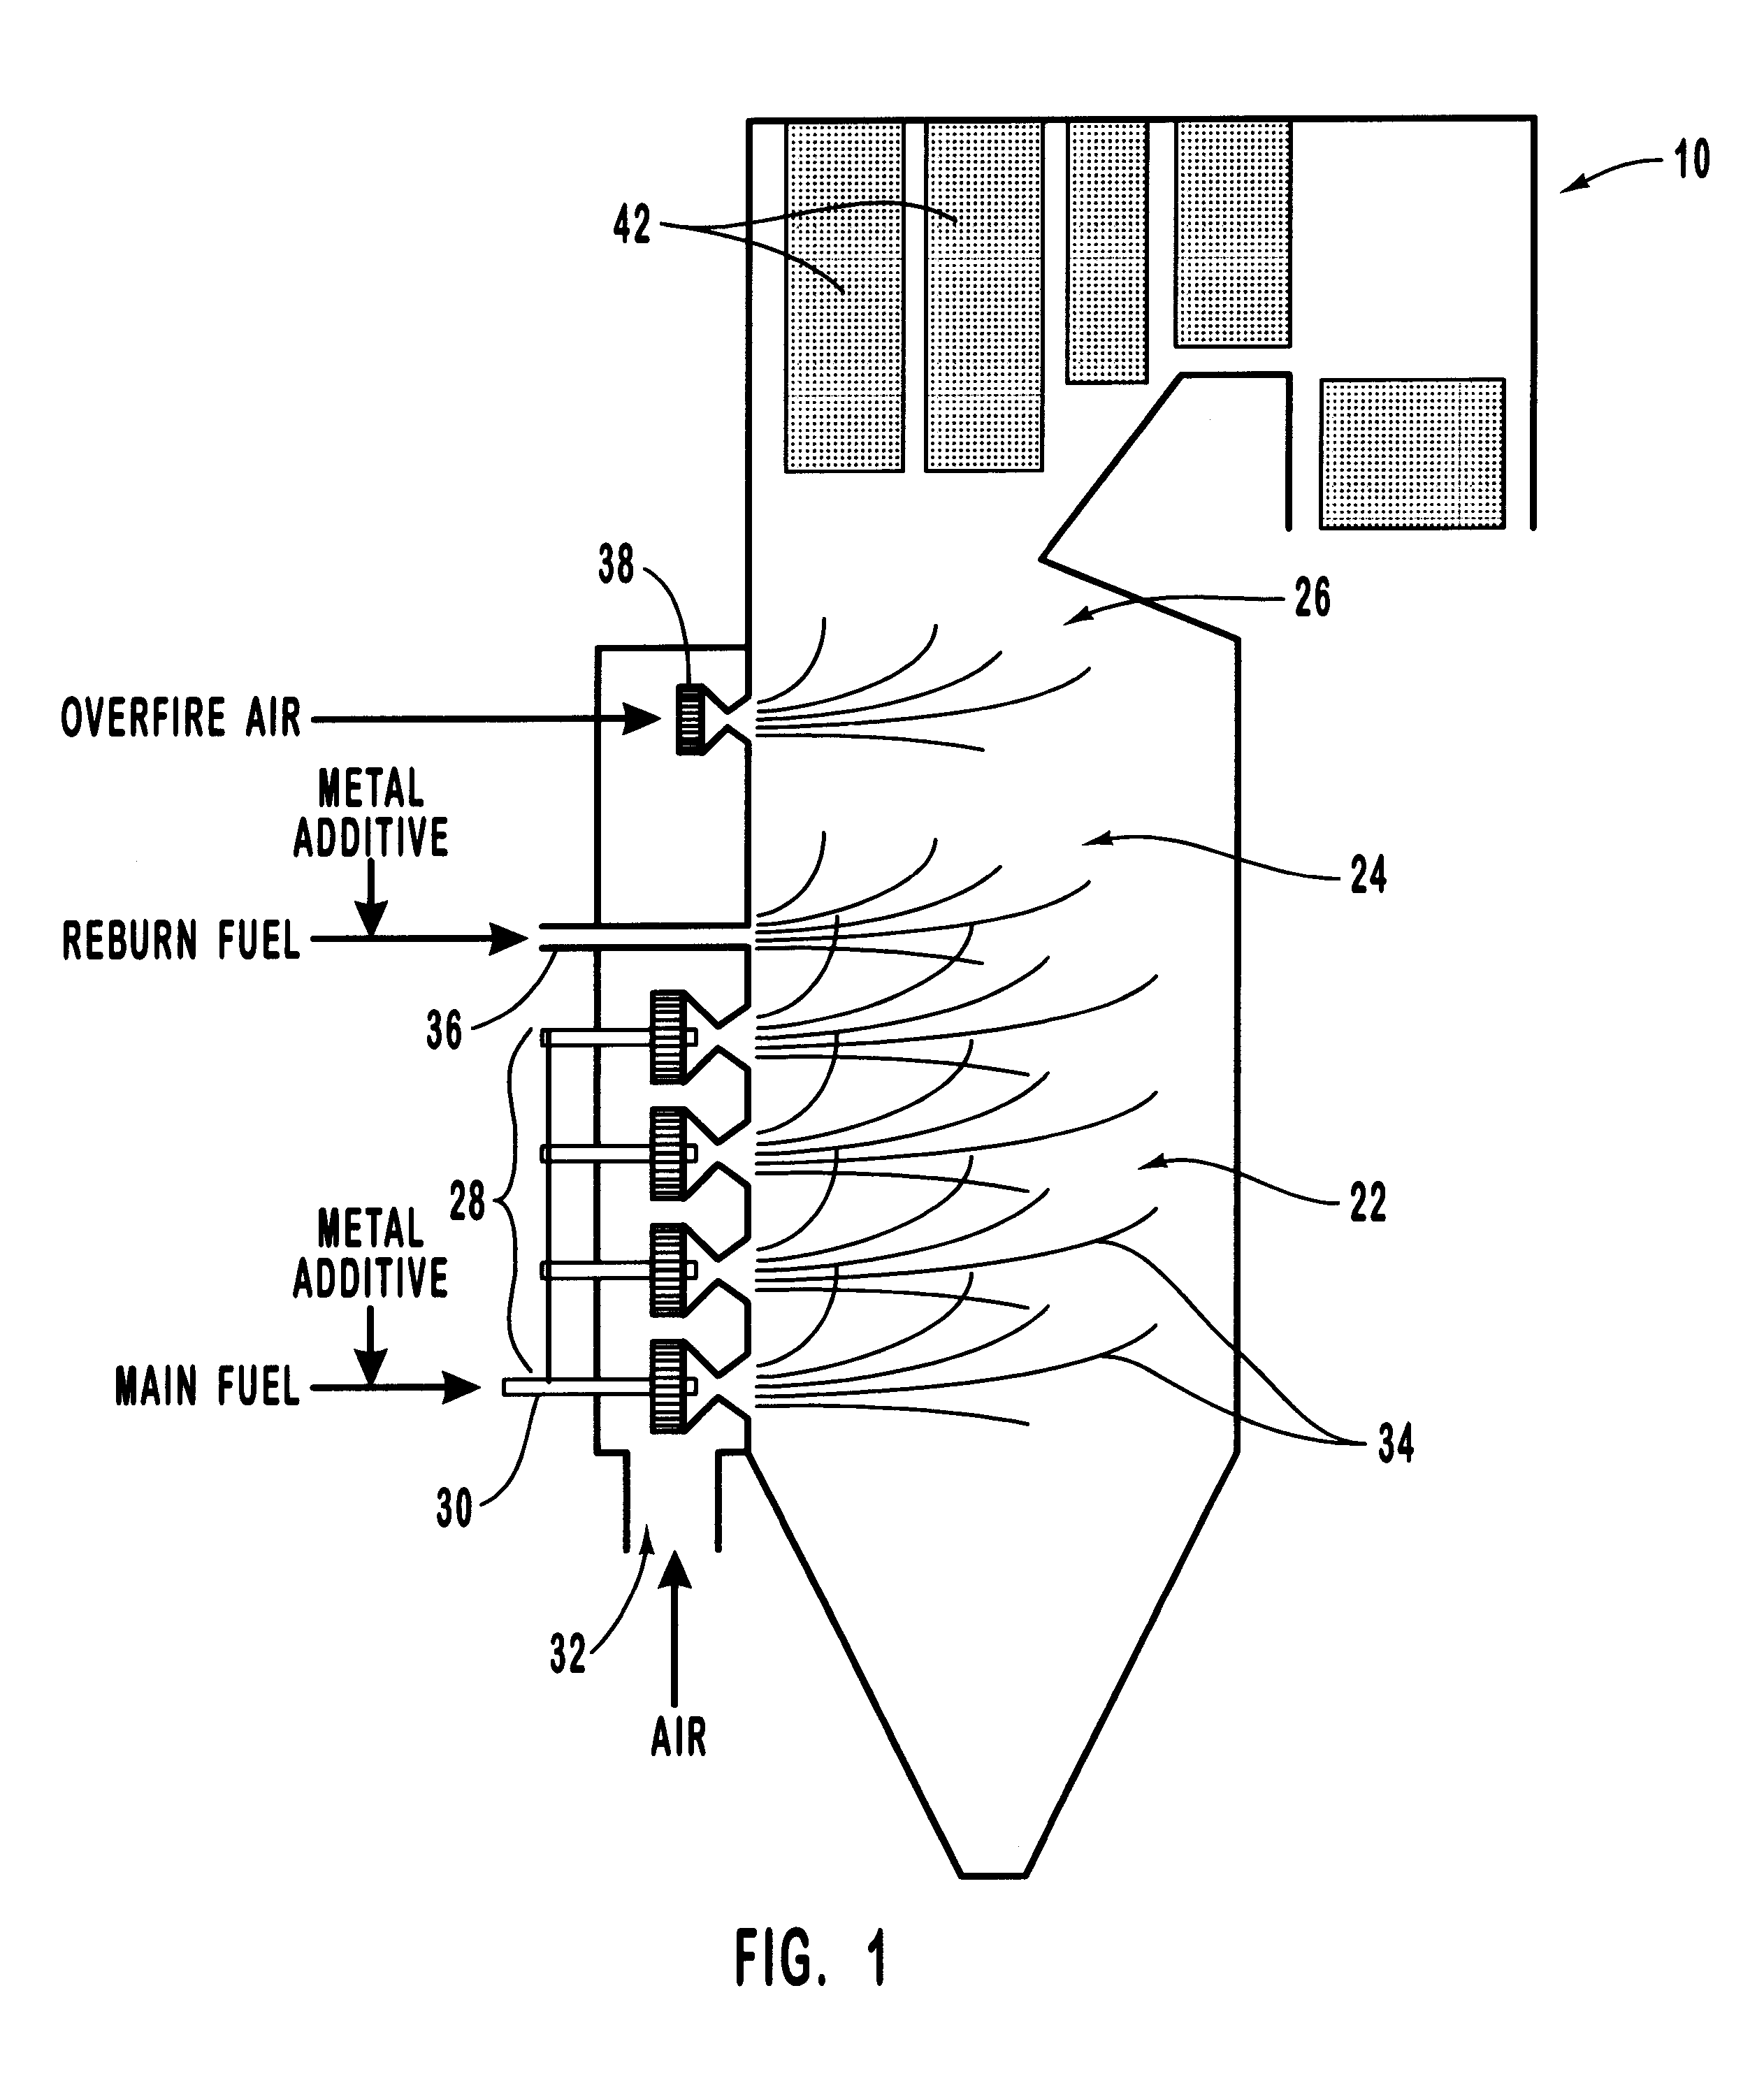 Method for reducing NOX in combustion flue gas using metal-containing additives